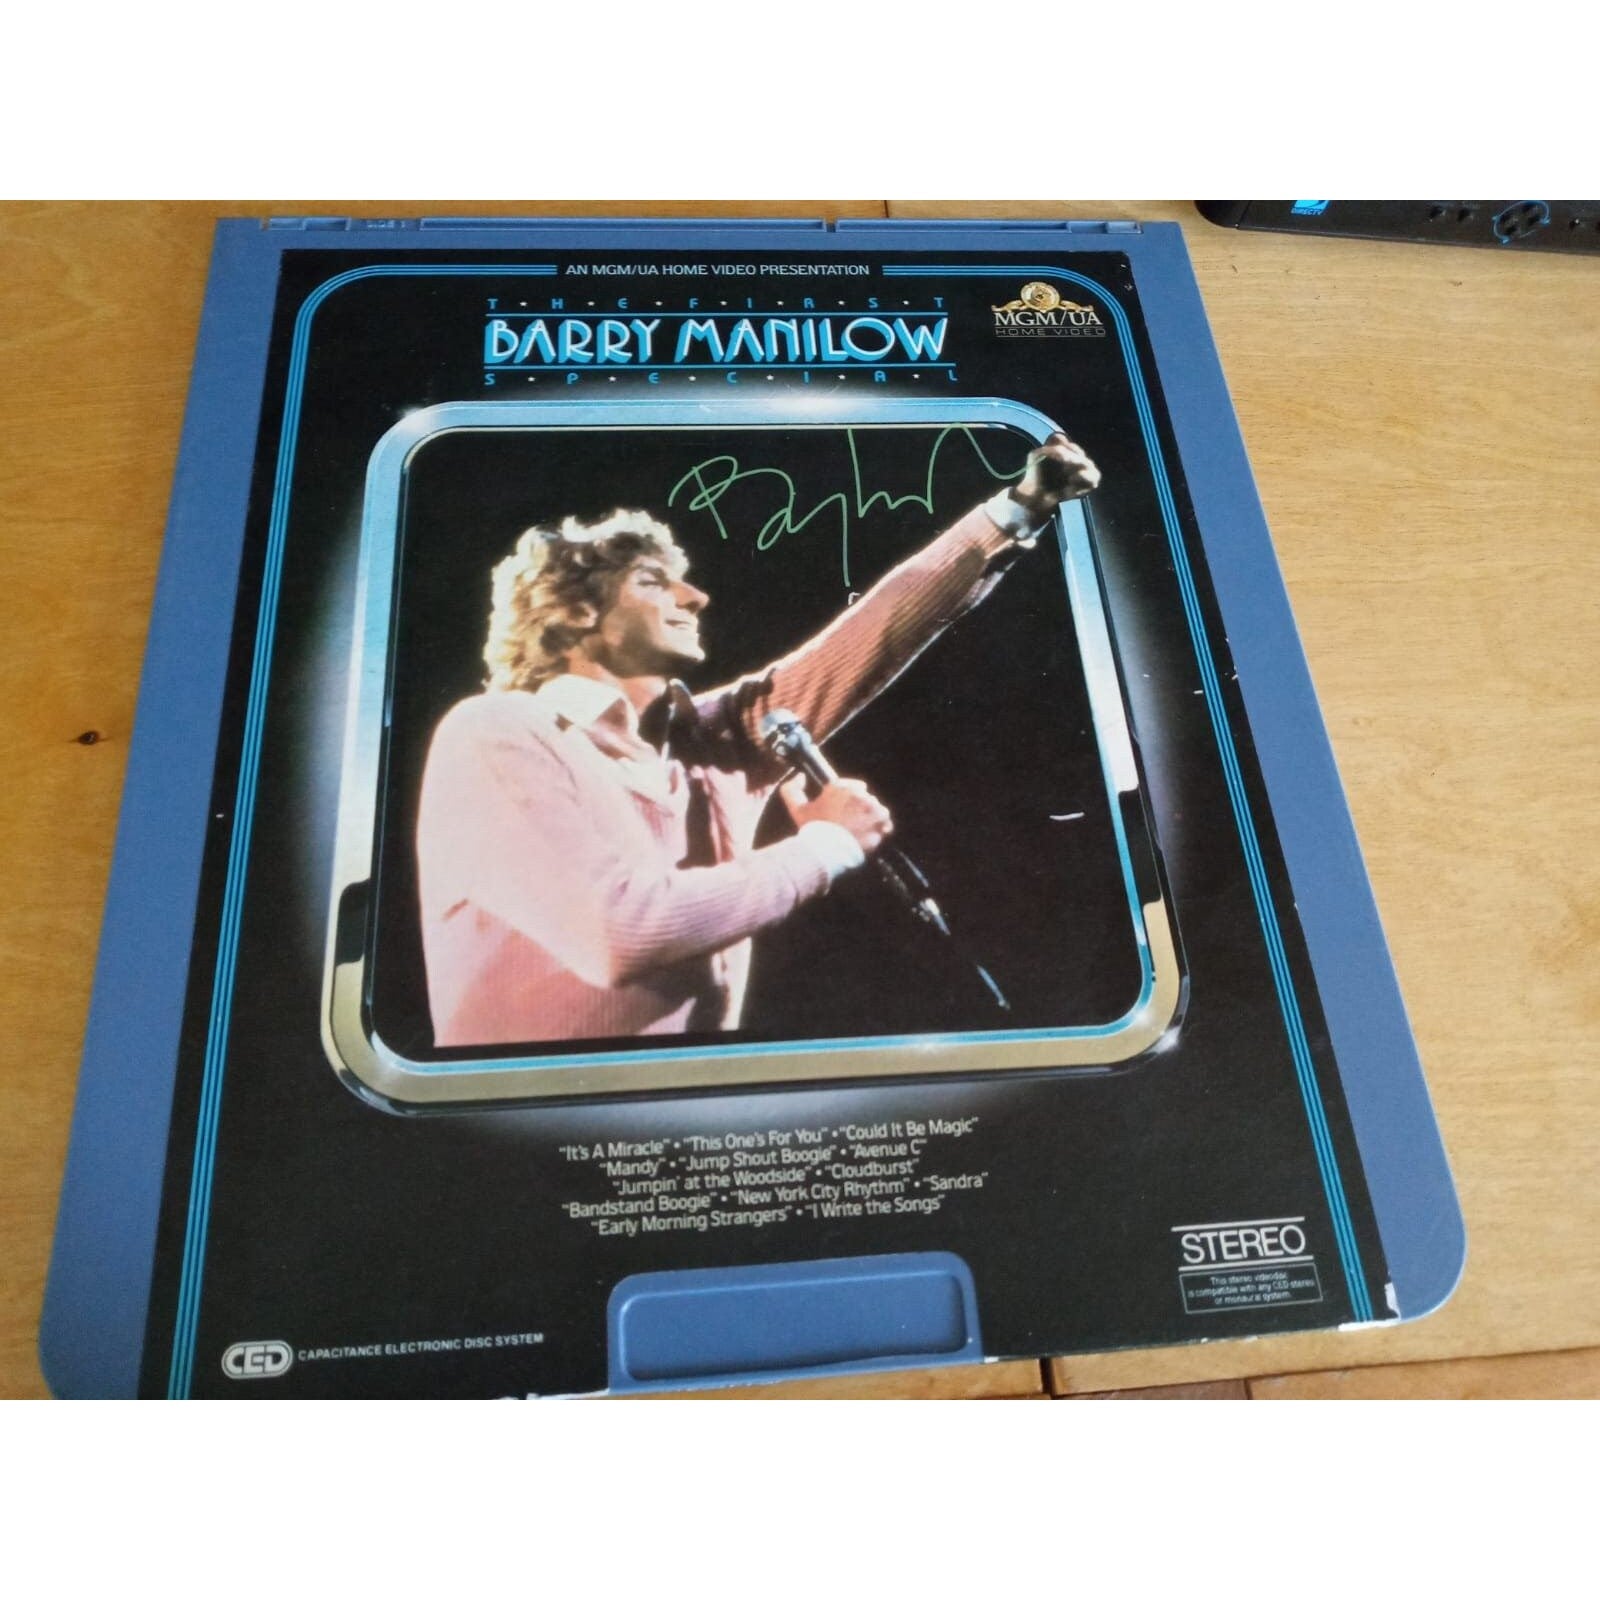 Barry Manilow RCA video disc vintage signed